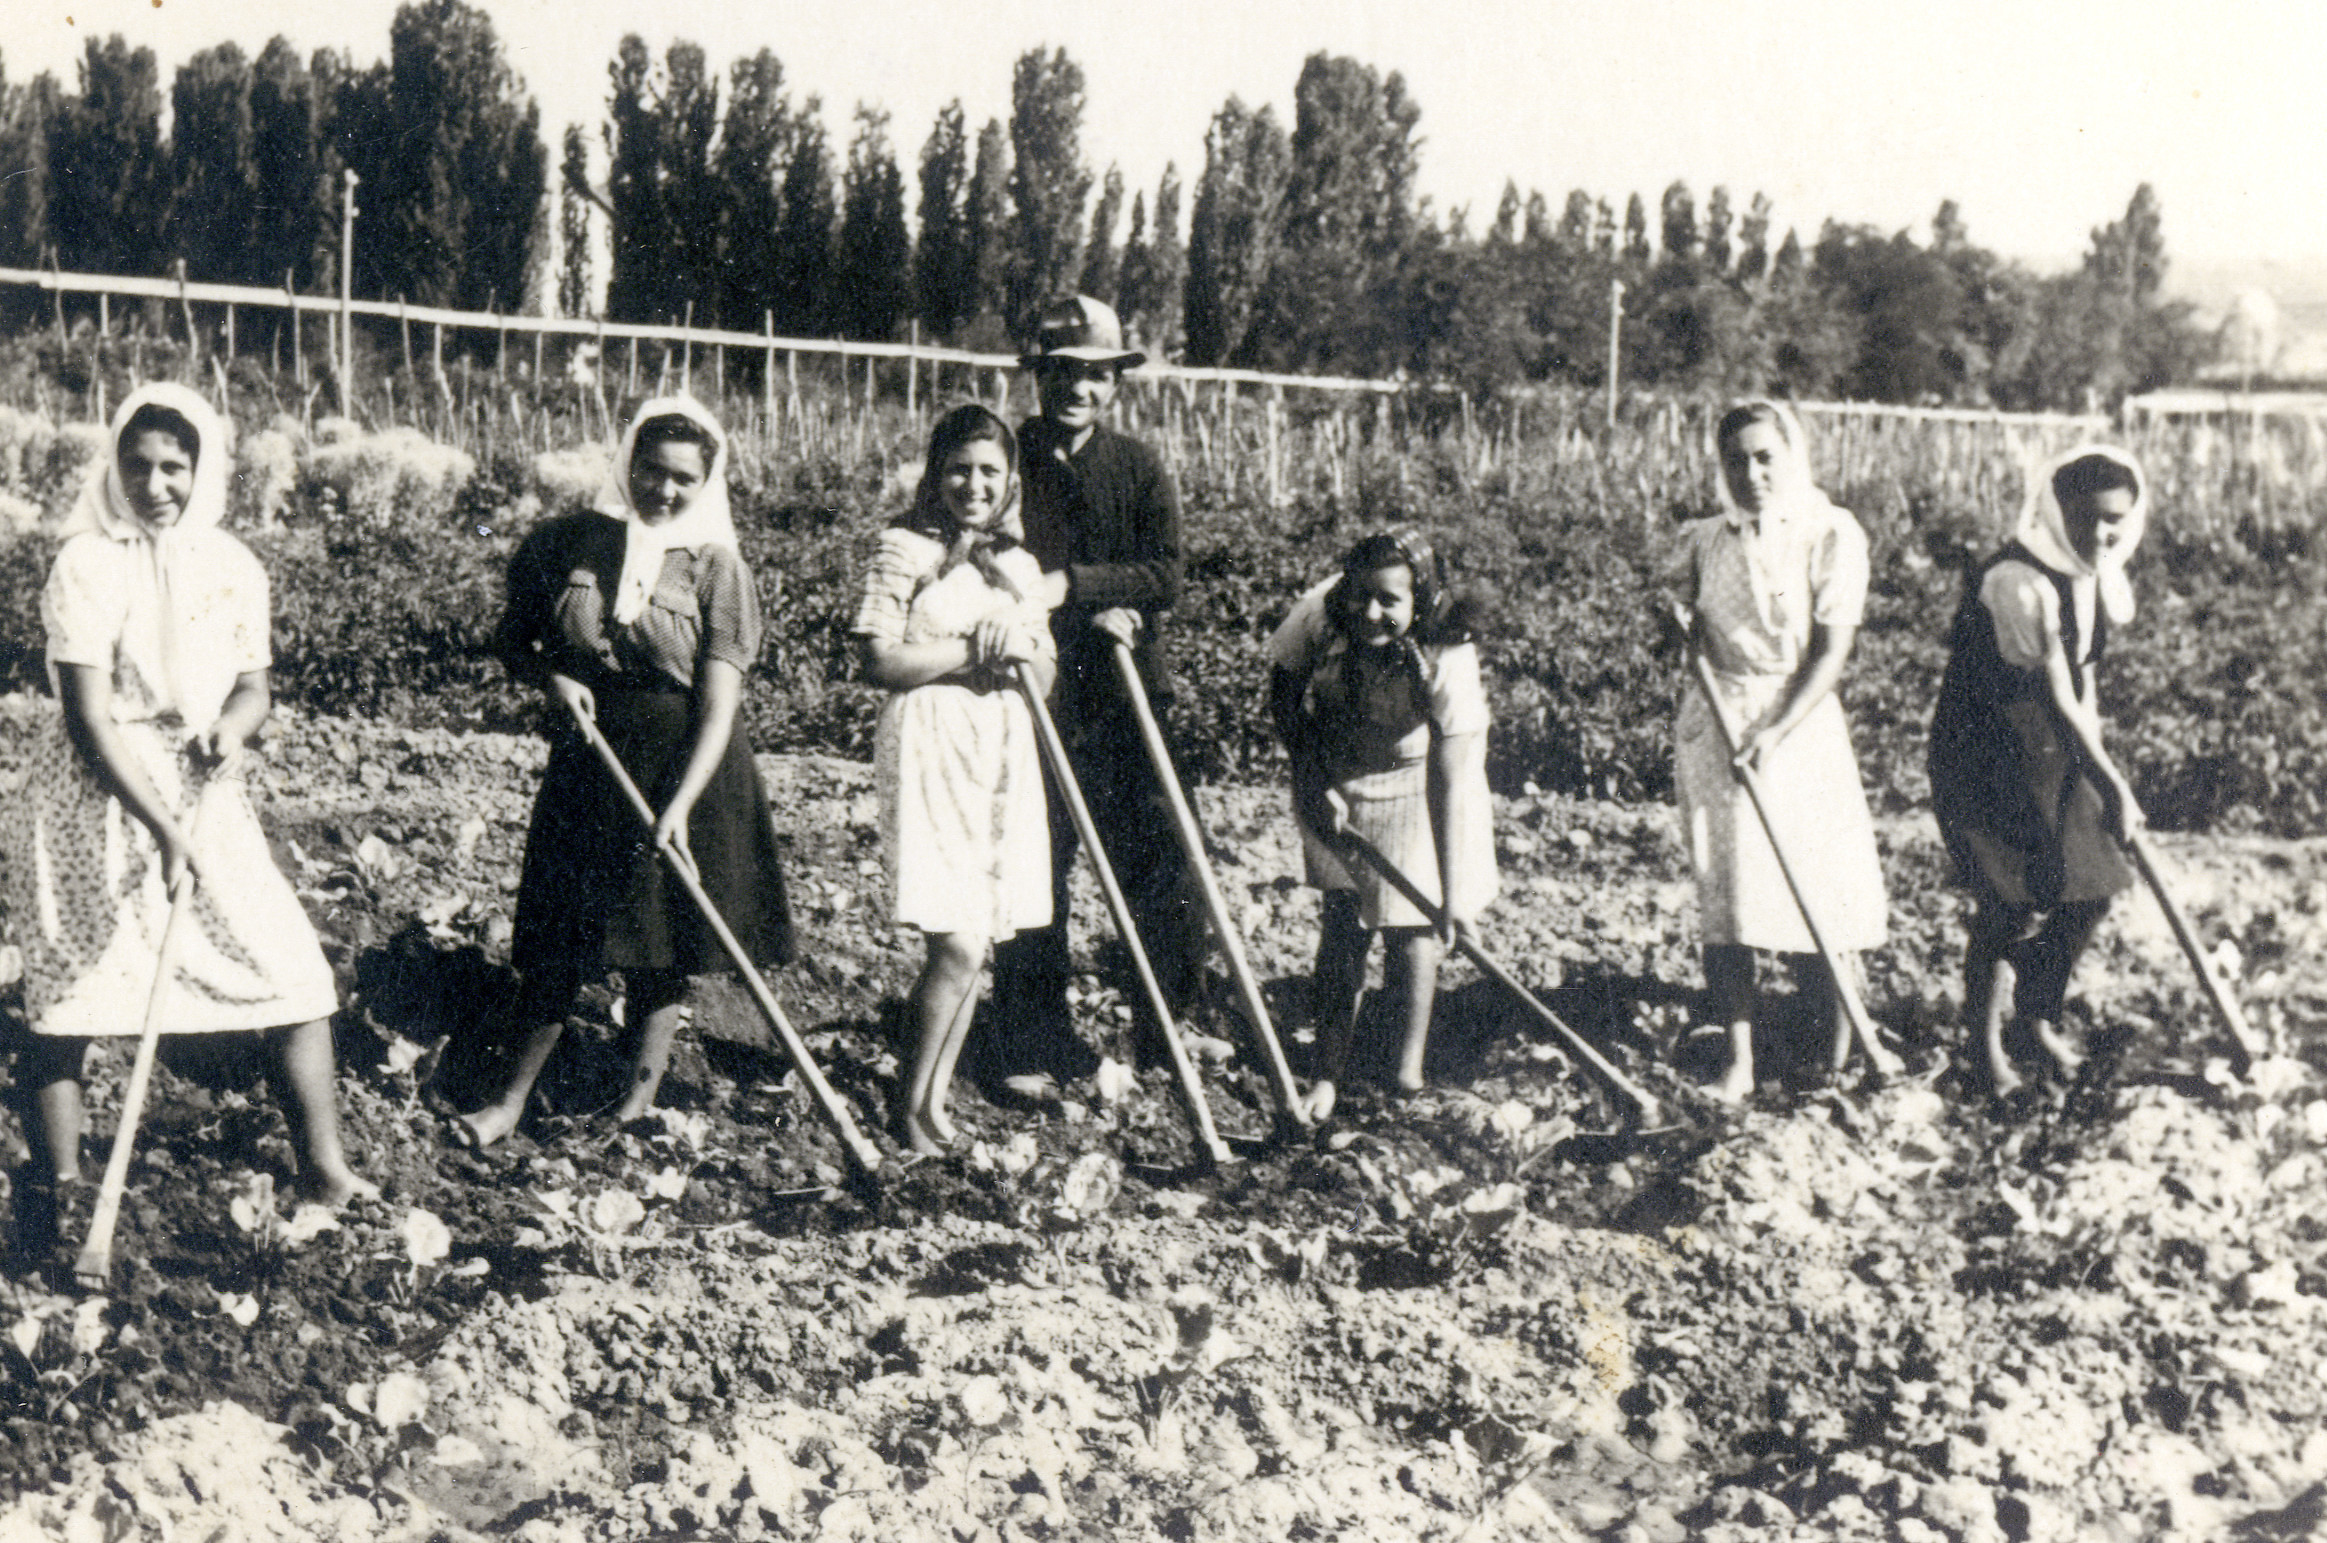 Jews from Sofia tend their garden outside Haskovo, Bulgaria, where they had been deported.

Among those pictured is Lore Beracha (far left).